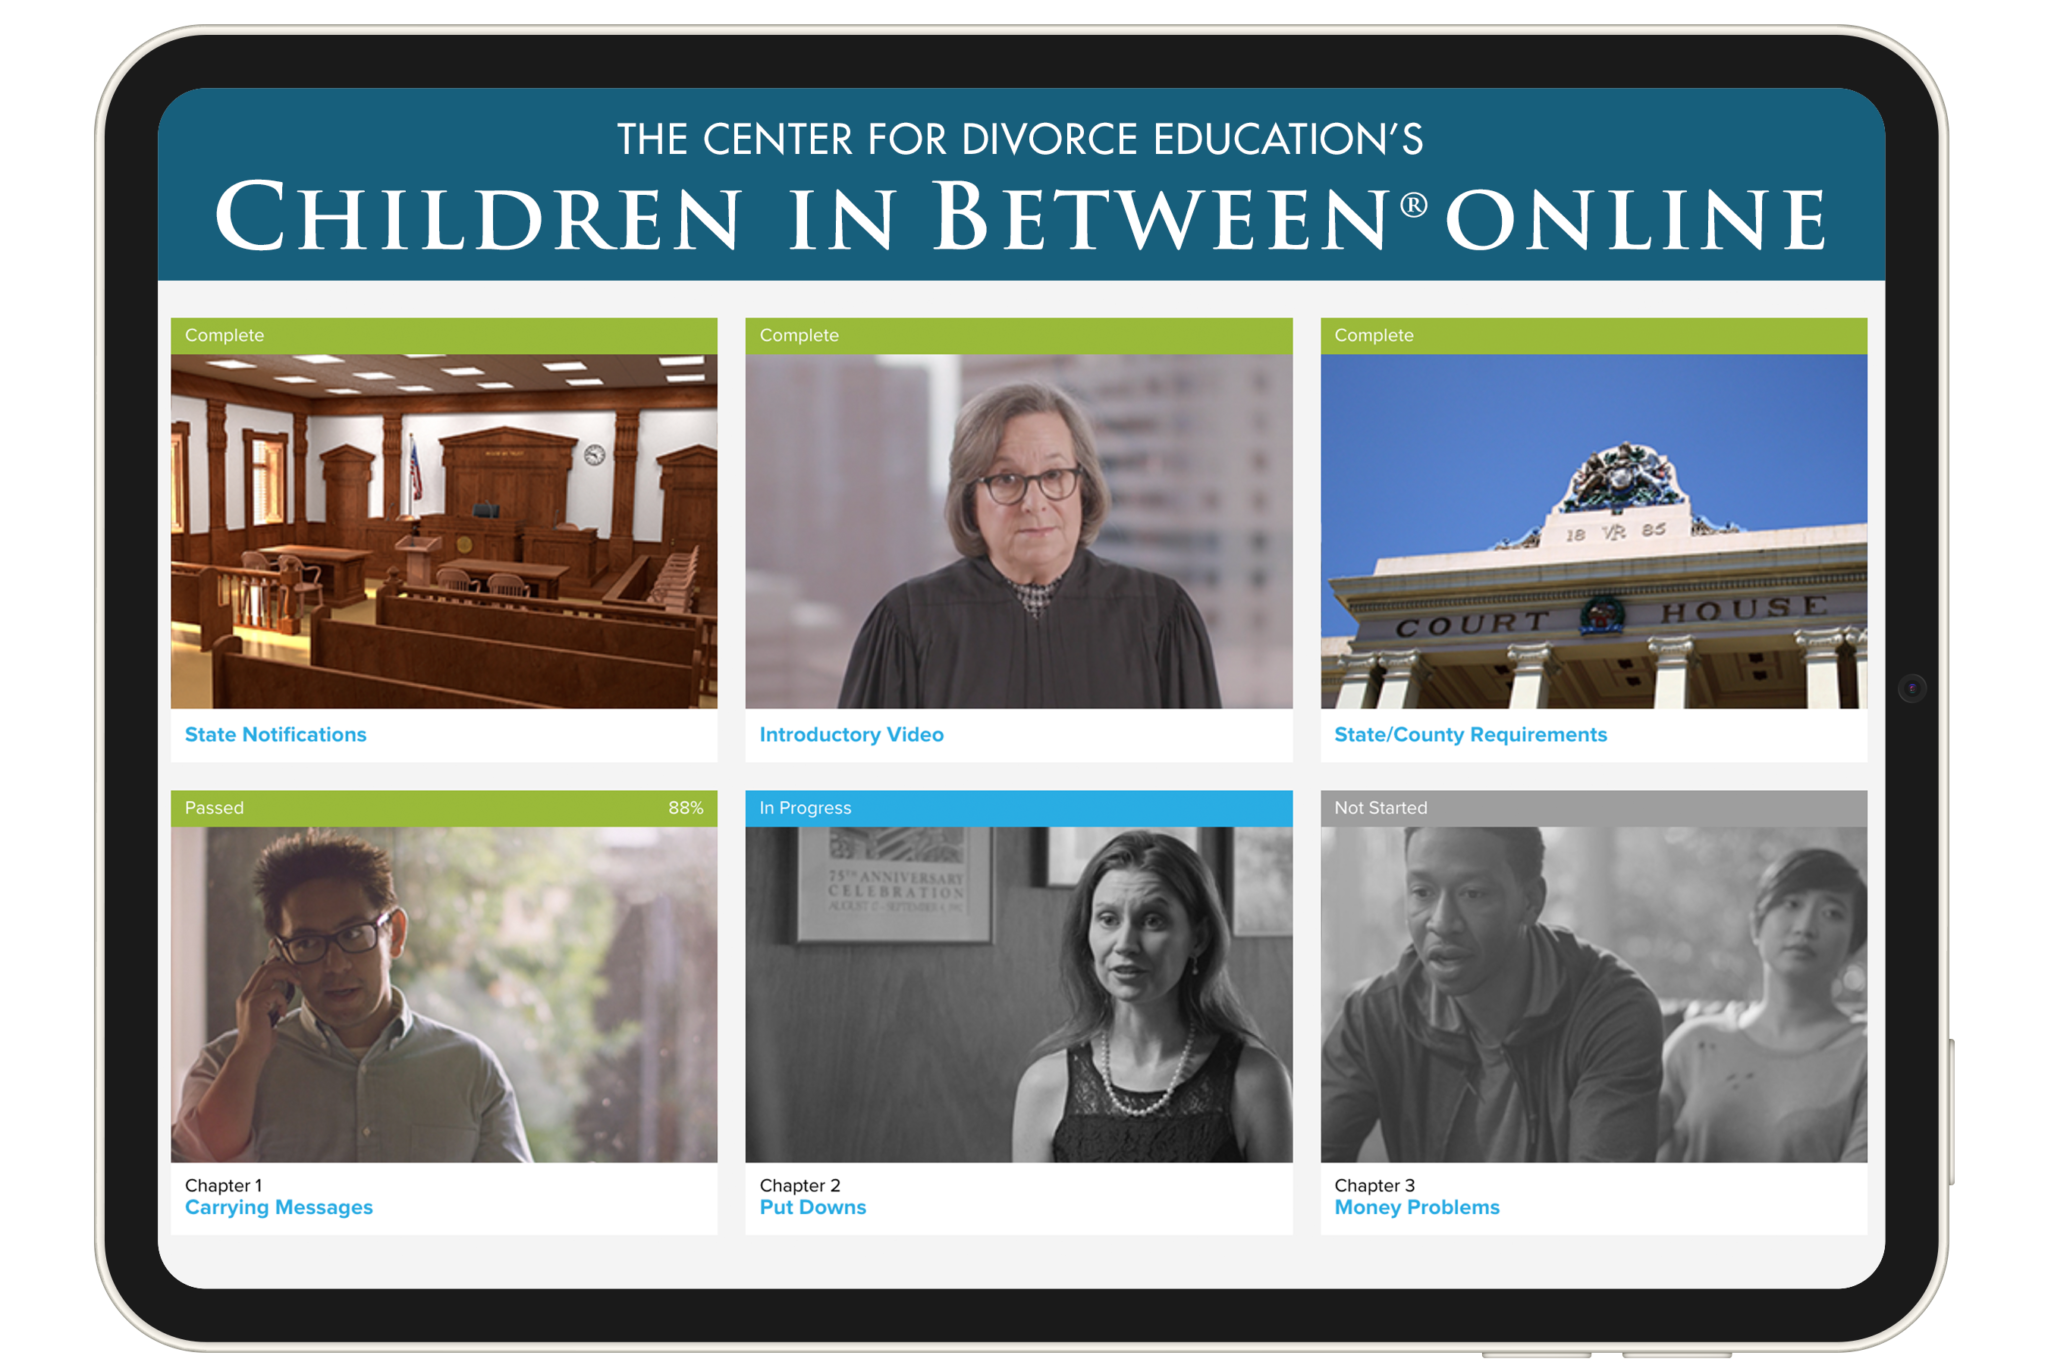 Thumbnail image for the Children in Between online court-approved parenting classes for divorce in Oregon.